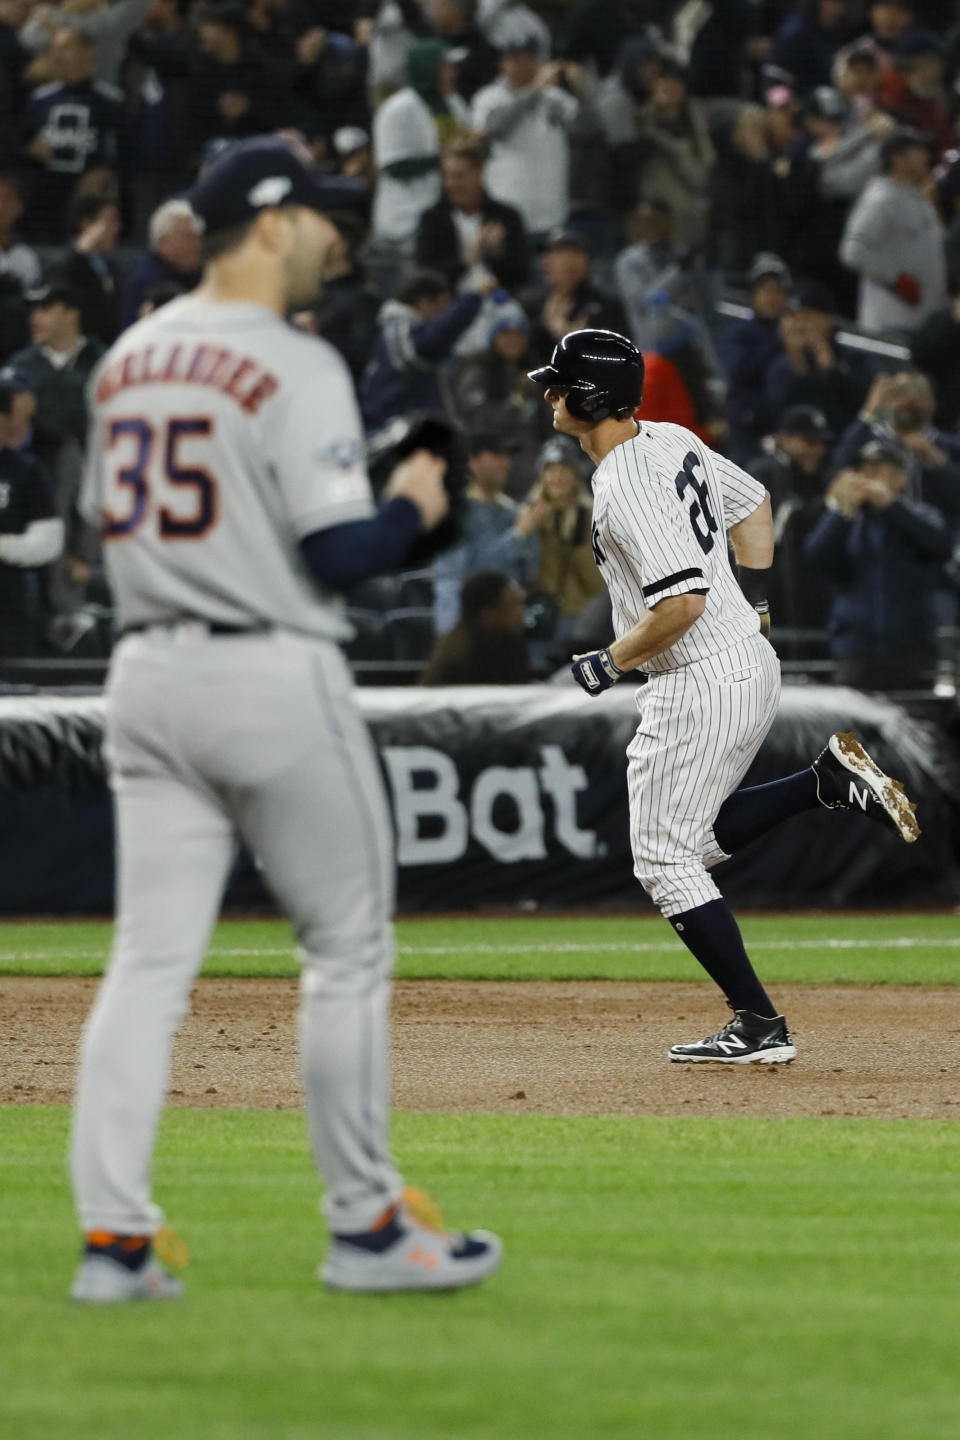 New York Yankees' DJ LeMahieu rounds the bases after a home run off Houston Astros starting pitcher Justin Verlander during the first inning in Game 5 of baseball's American League Championship Series Friday, Oct. 18, 2019, in New York. (AP Photo/Matt Slocum)